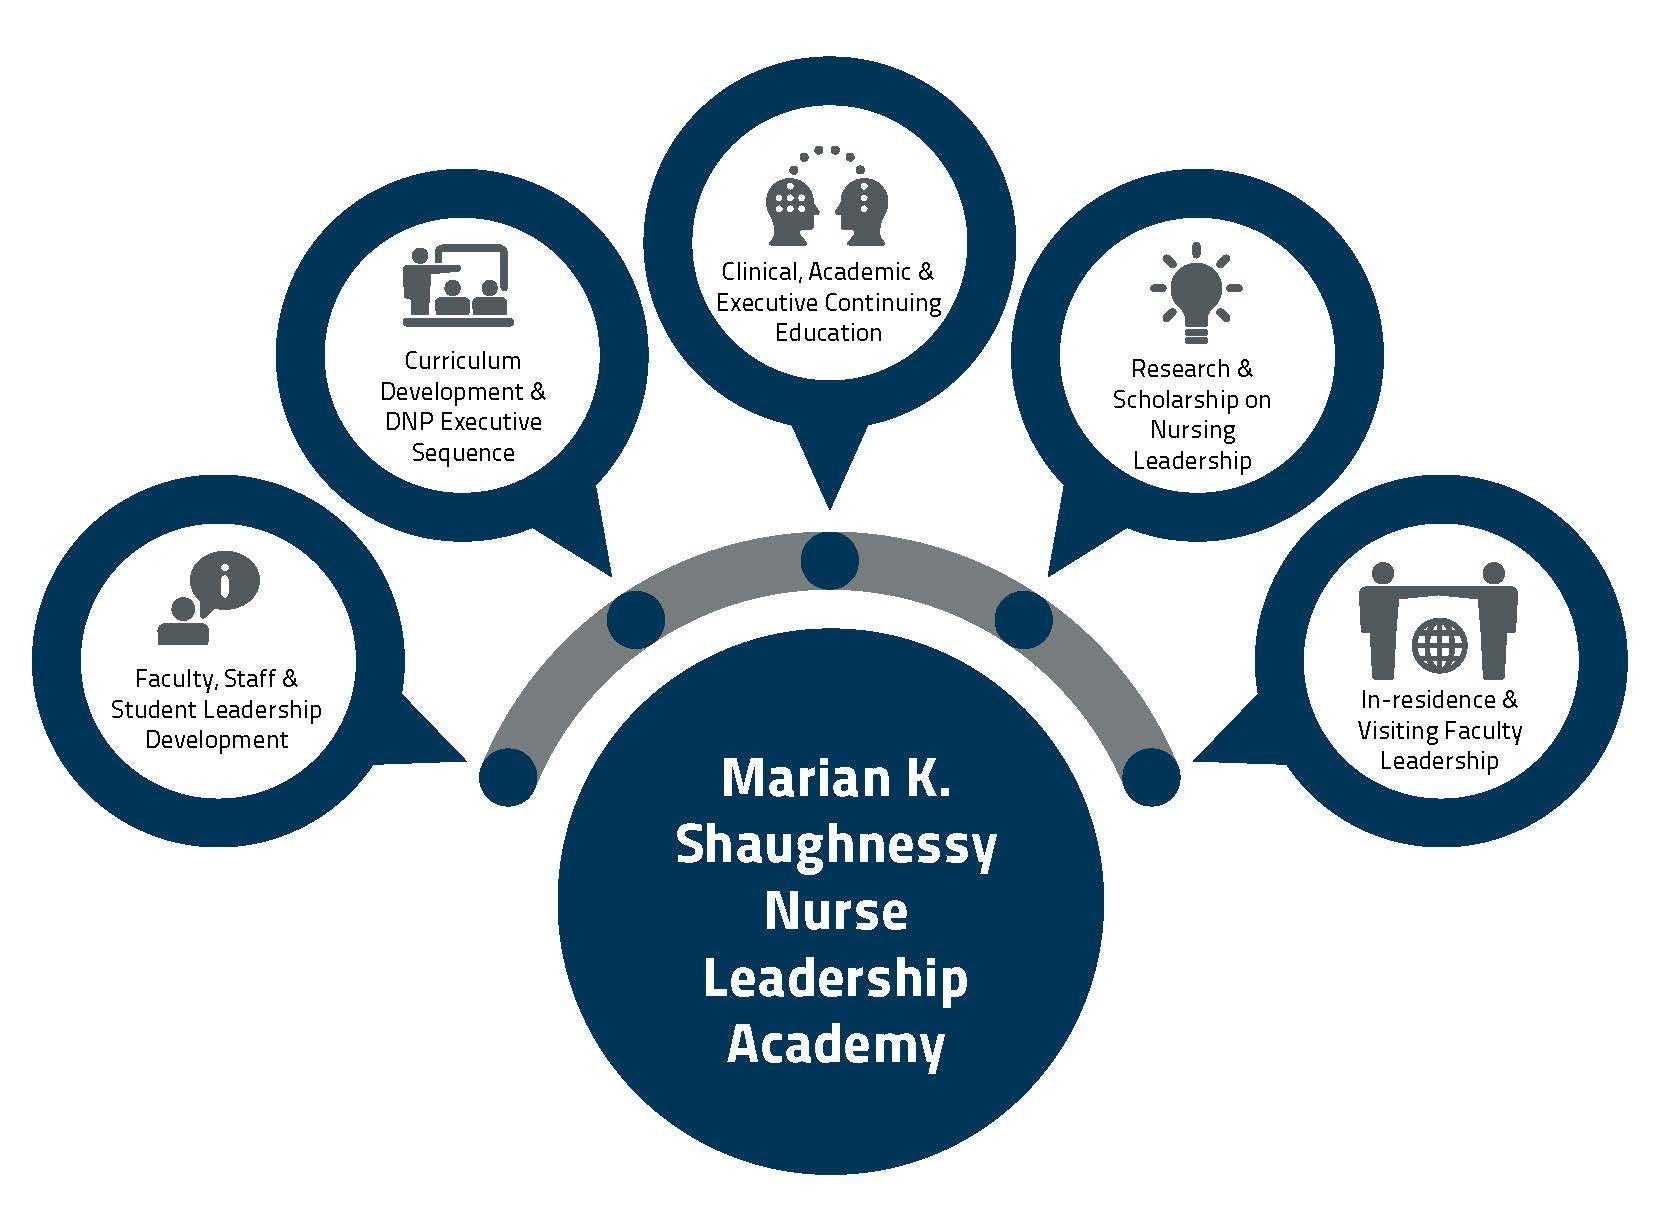 The logo for the Marian K. Shaughnessy Nurse Leadership Academy featuring the five principles of faculty and staff development; curriculum development; continuing education; nurse leadership research and in-residence and visiting faculty.